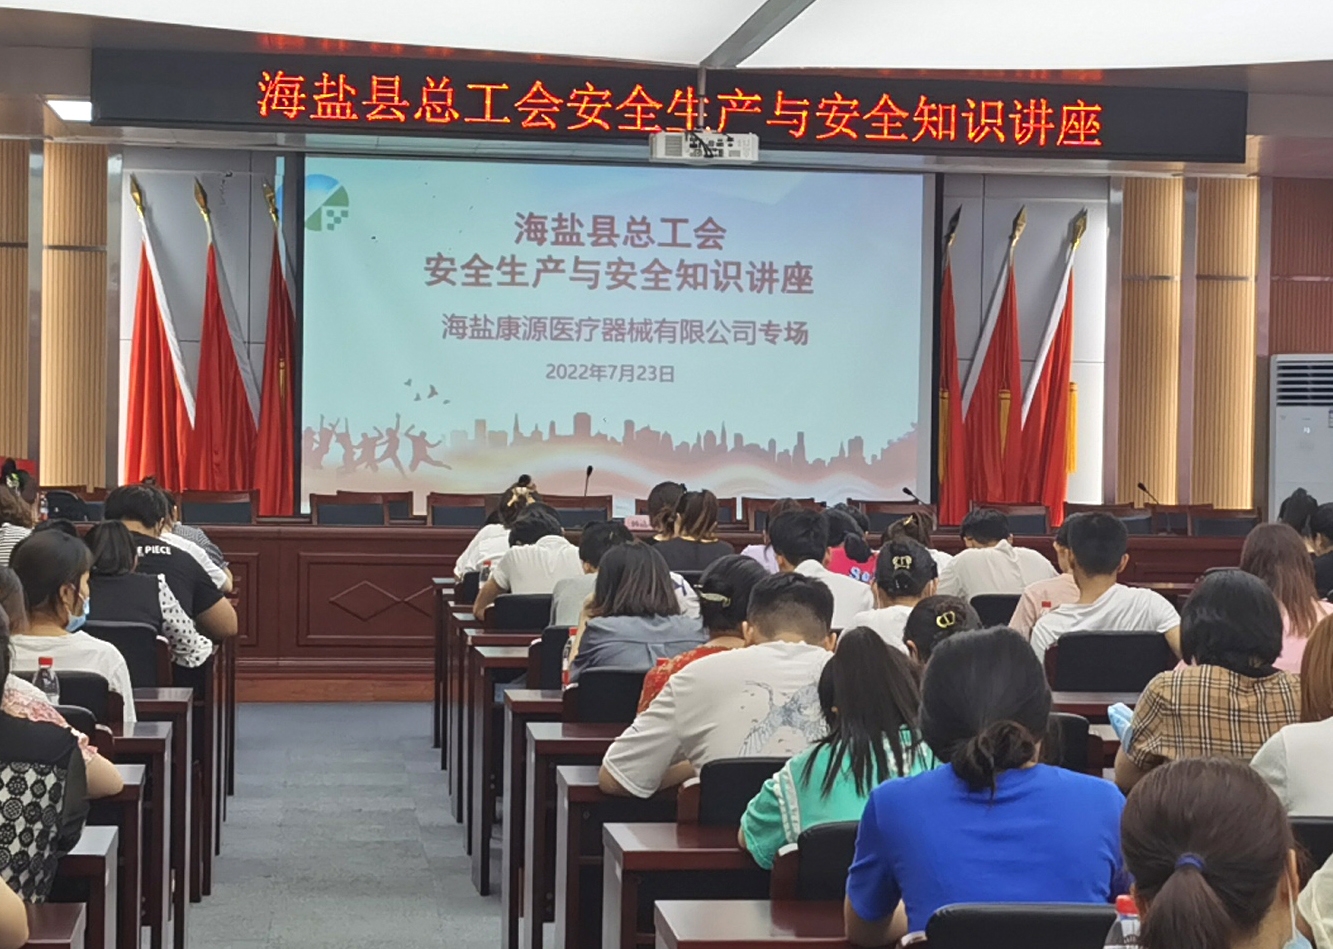 Haiyan County Federation of Trade Unions Held Safety Production Training